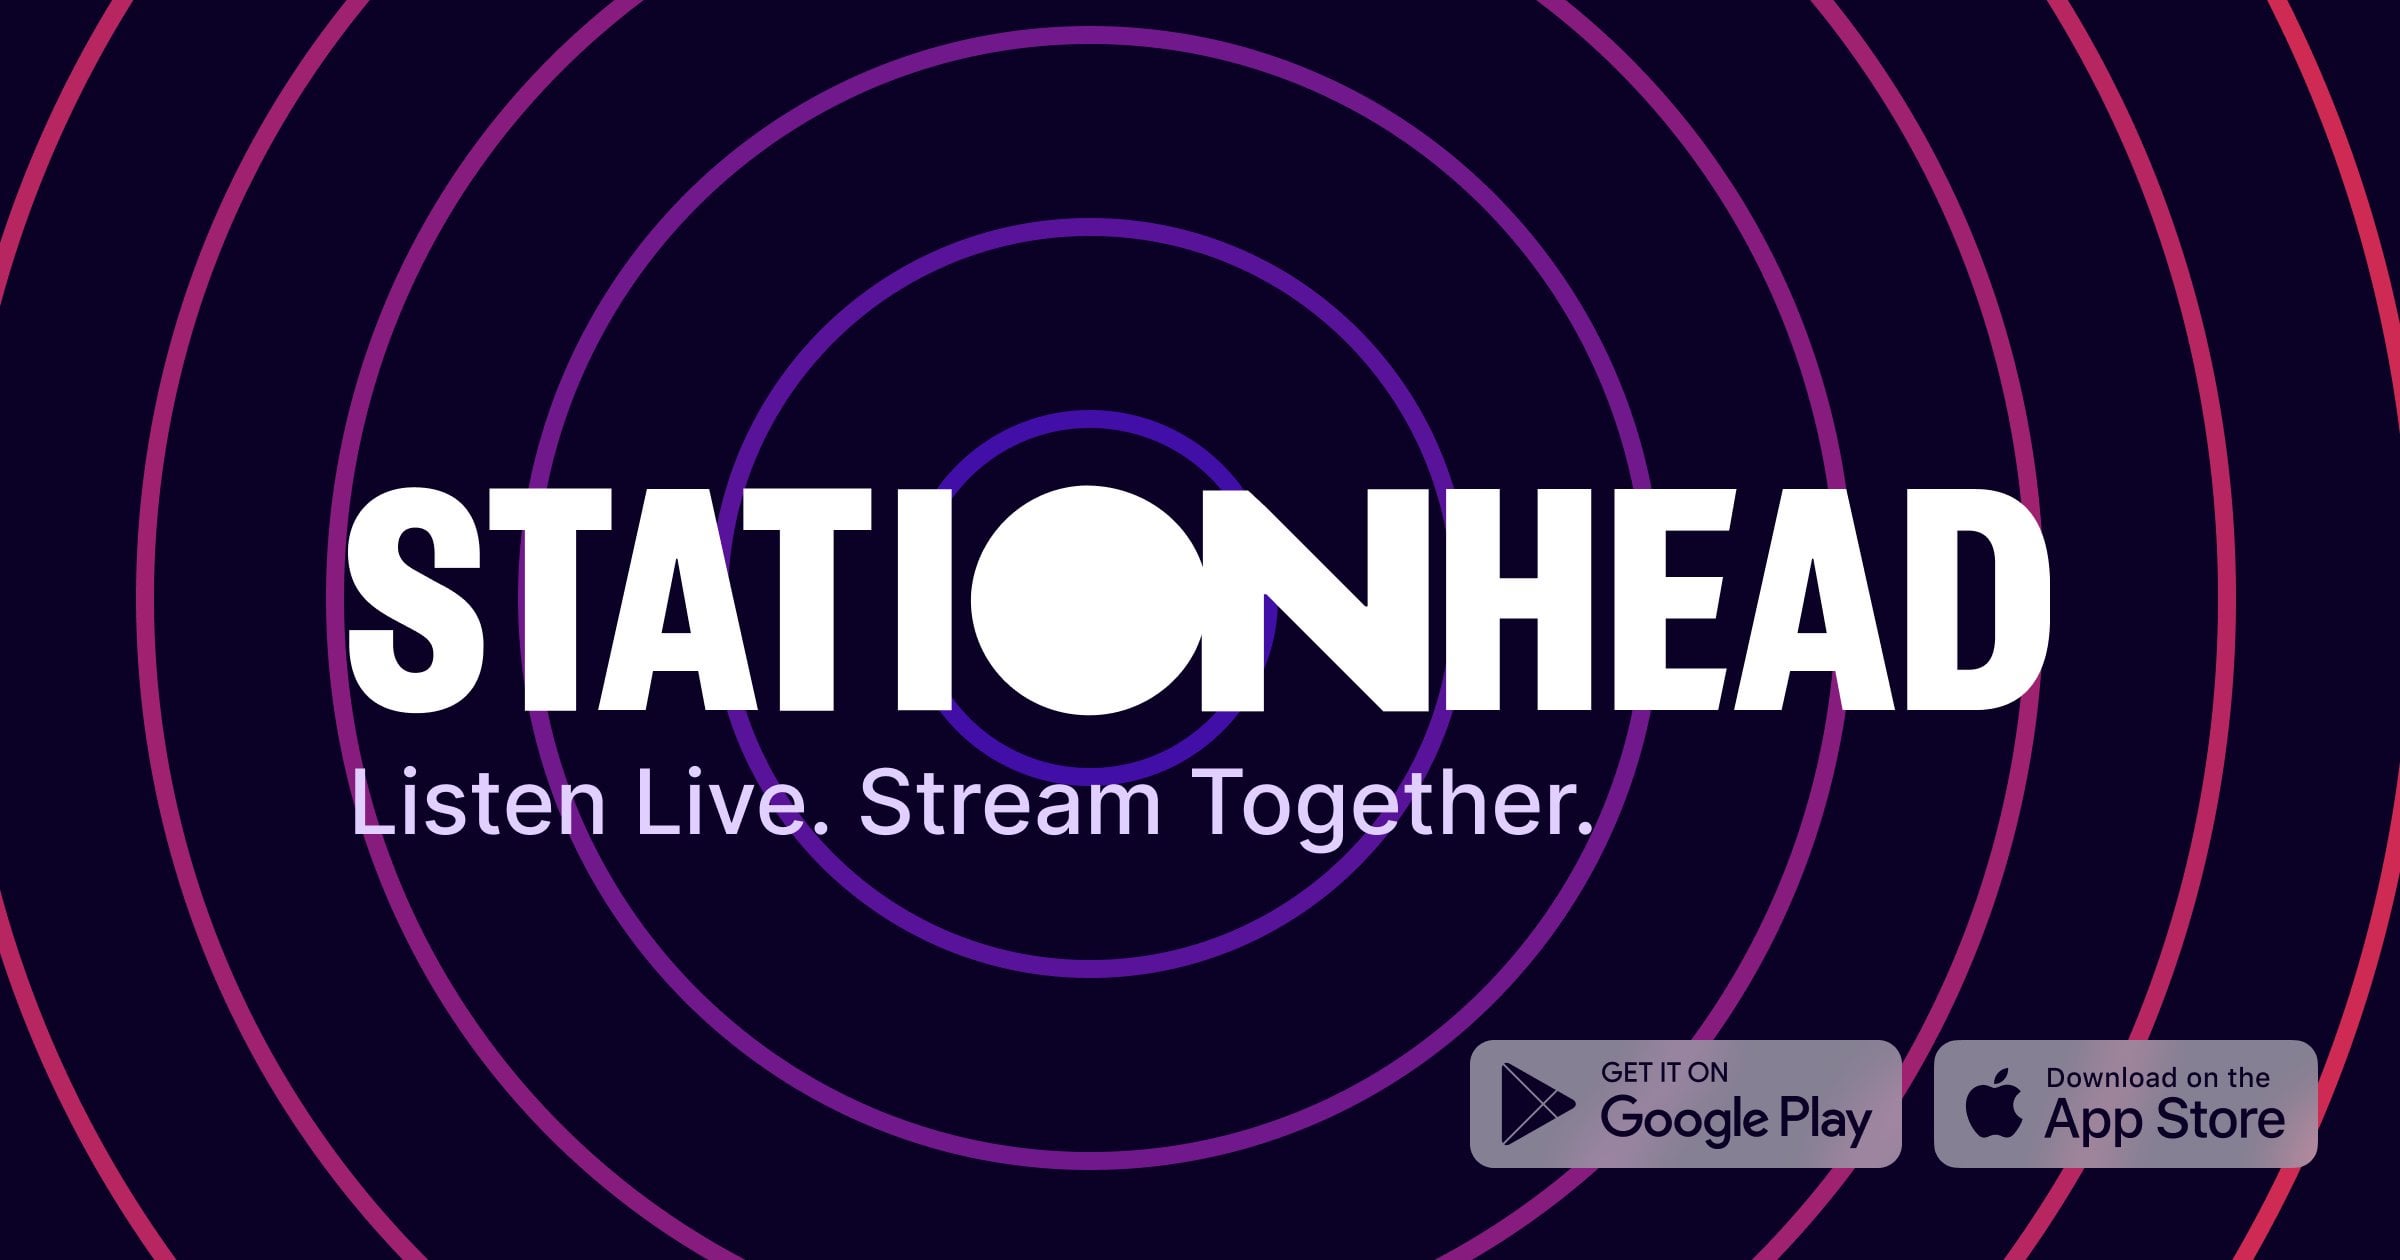 The r/bts7 Joon and BTS Stationhead Streaming Party - Chaotic test no. 2